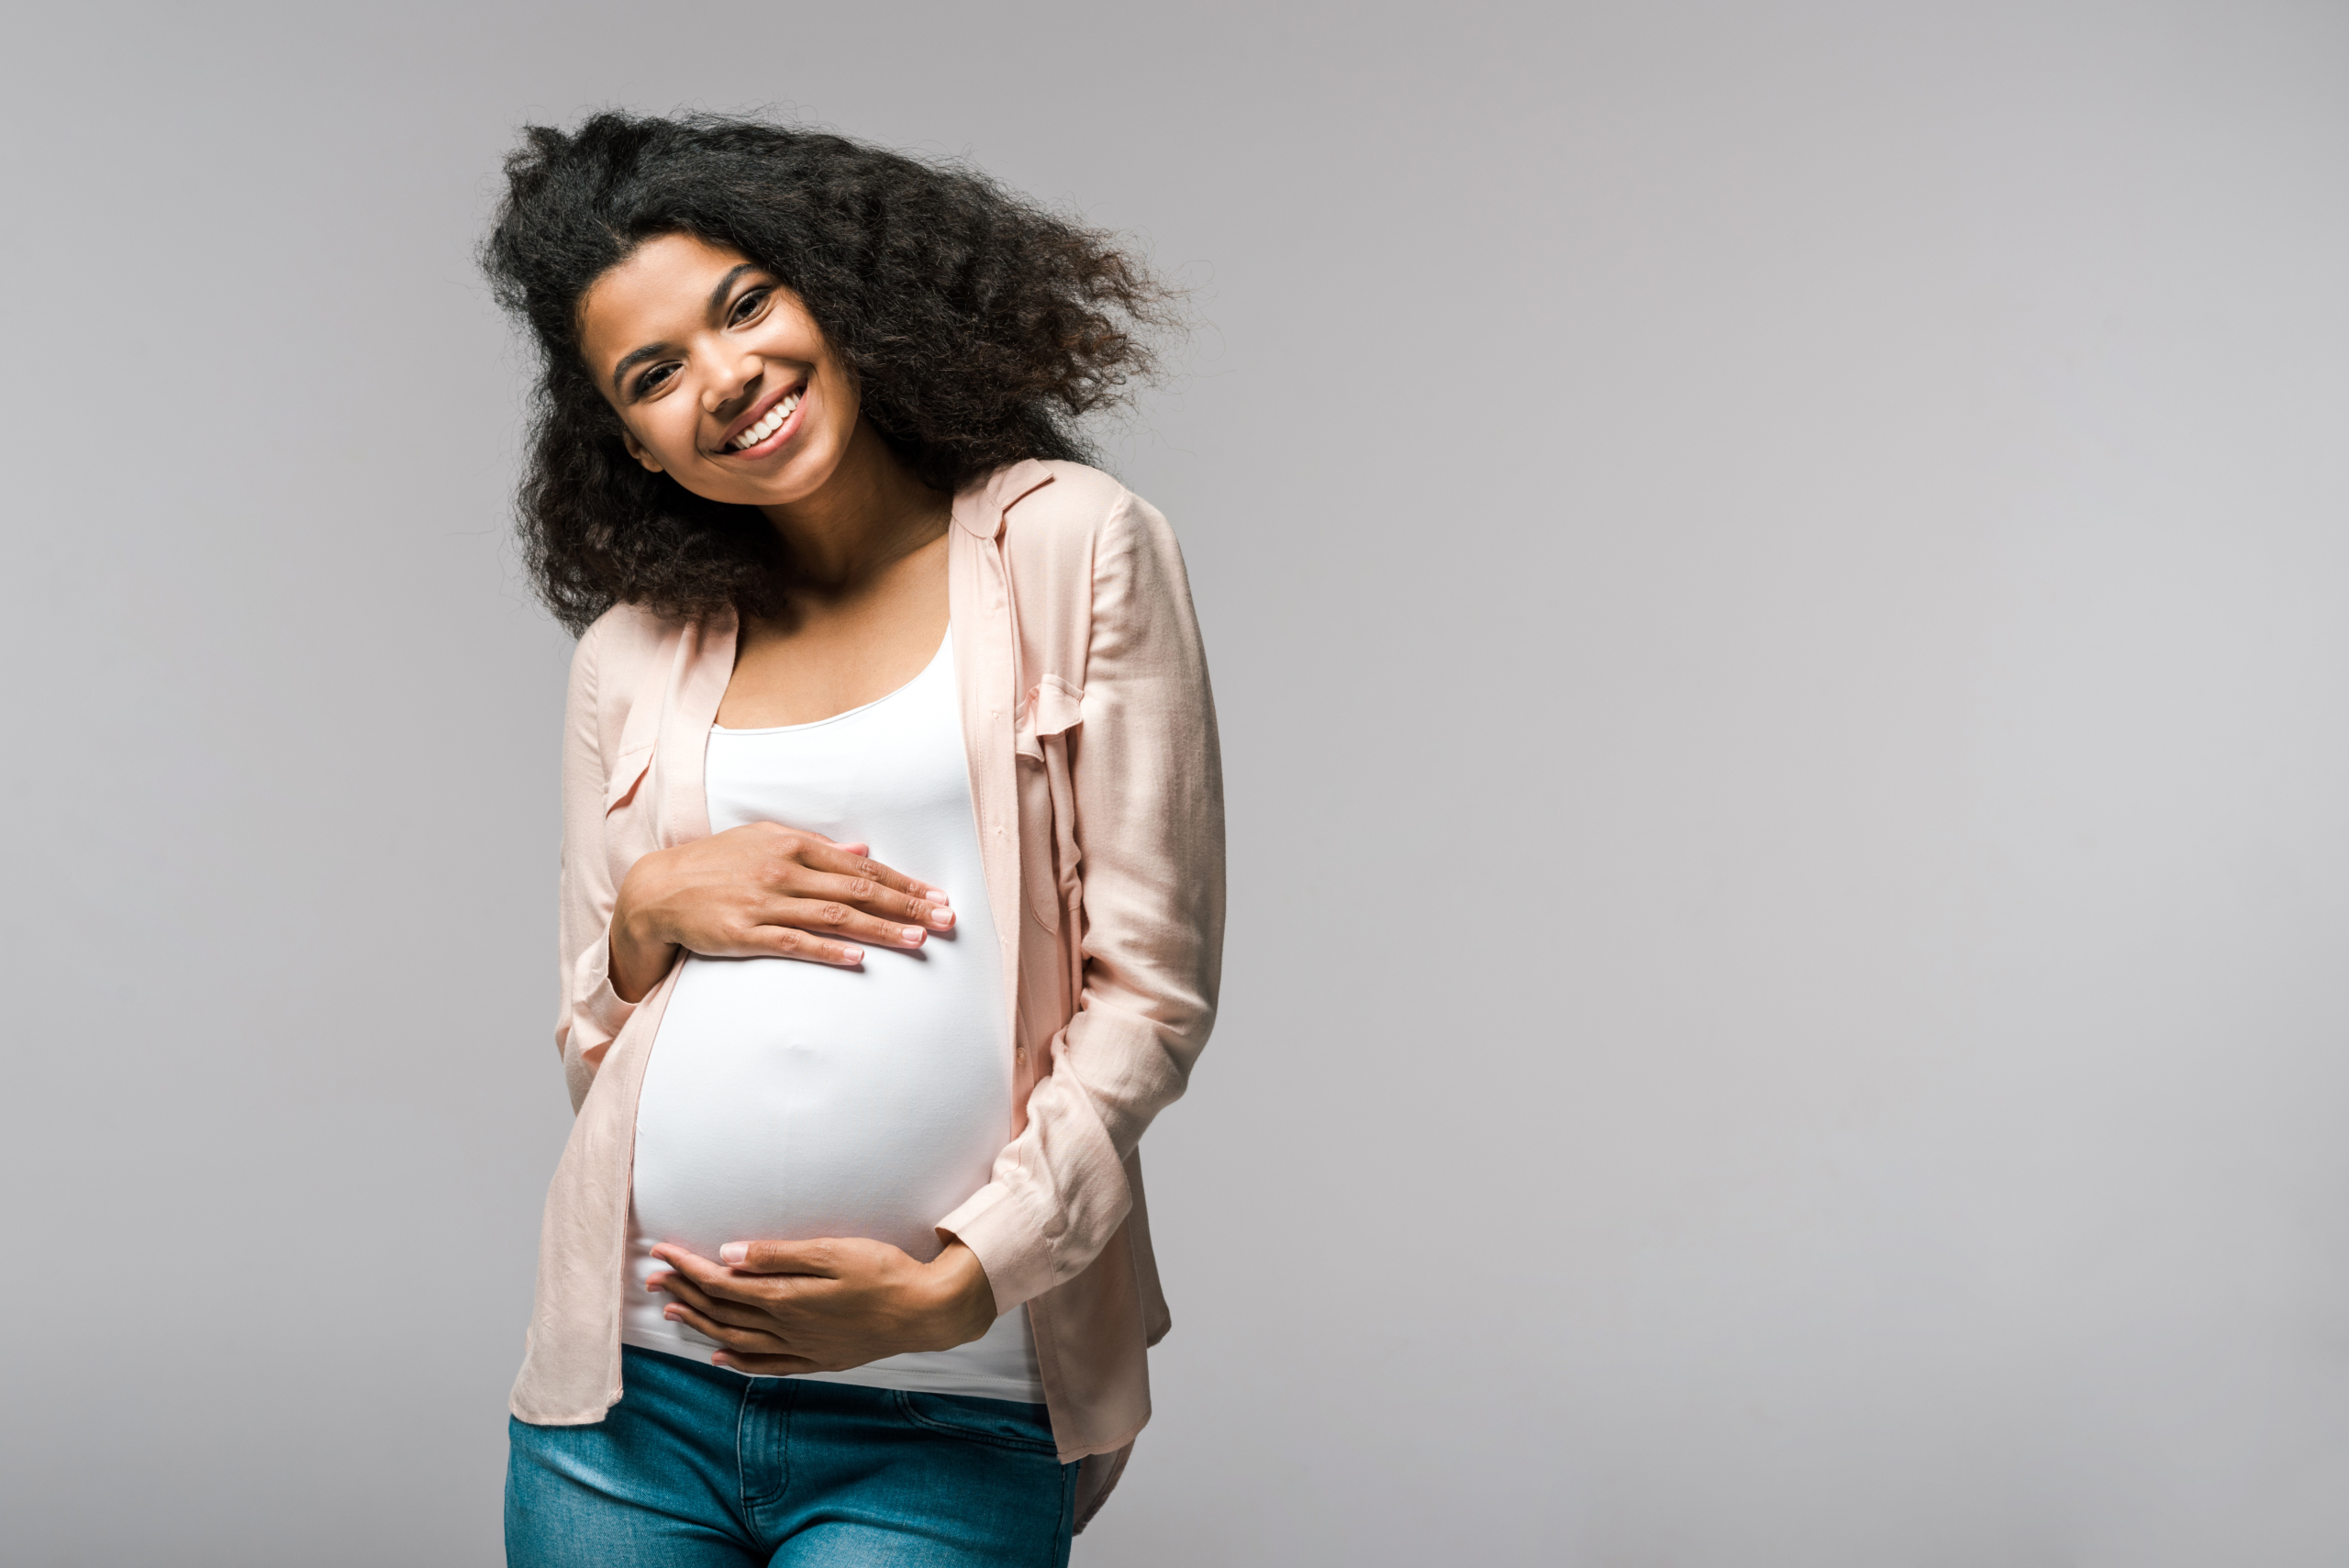 Tips for first-time surrogates from a veteran surrogate